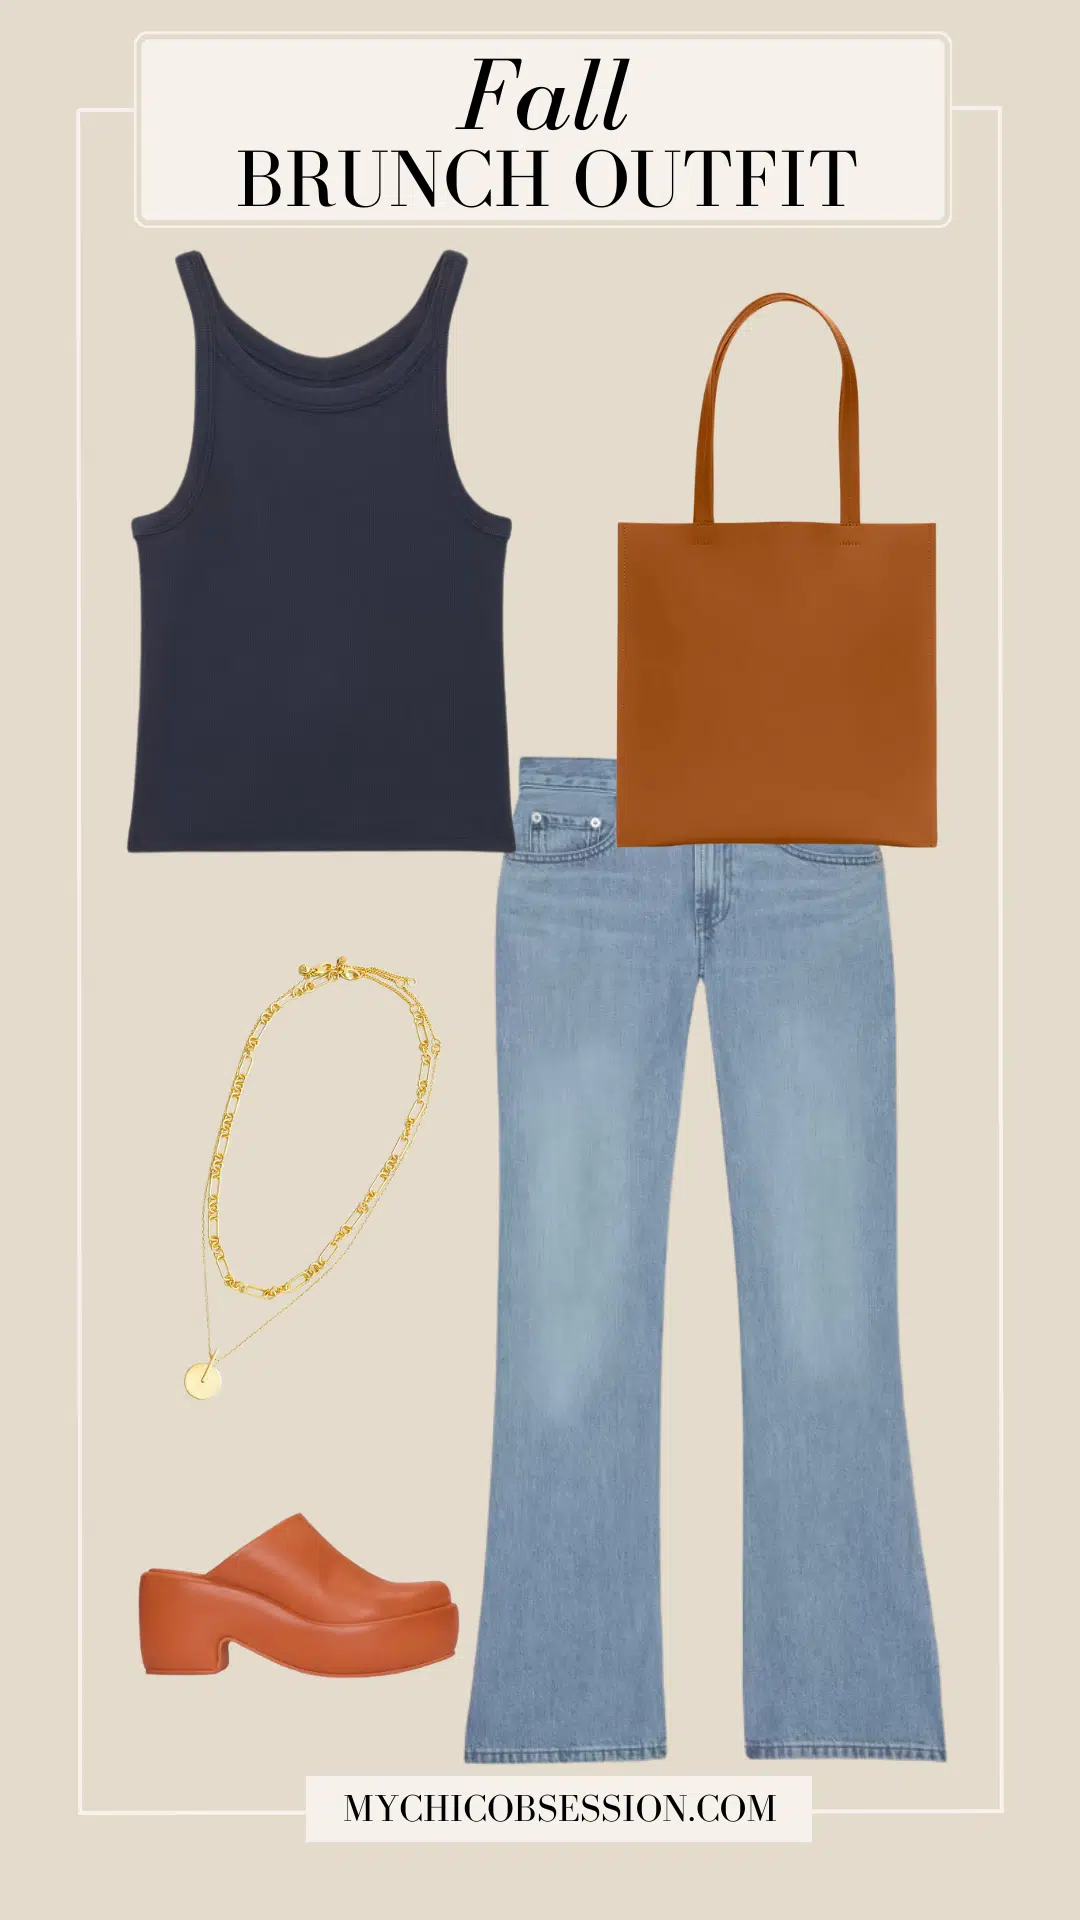 tank top, jeans, and clogs fall brunch outfit idea